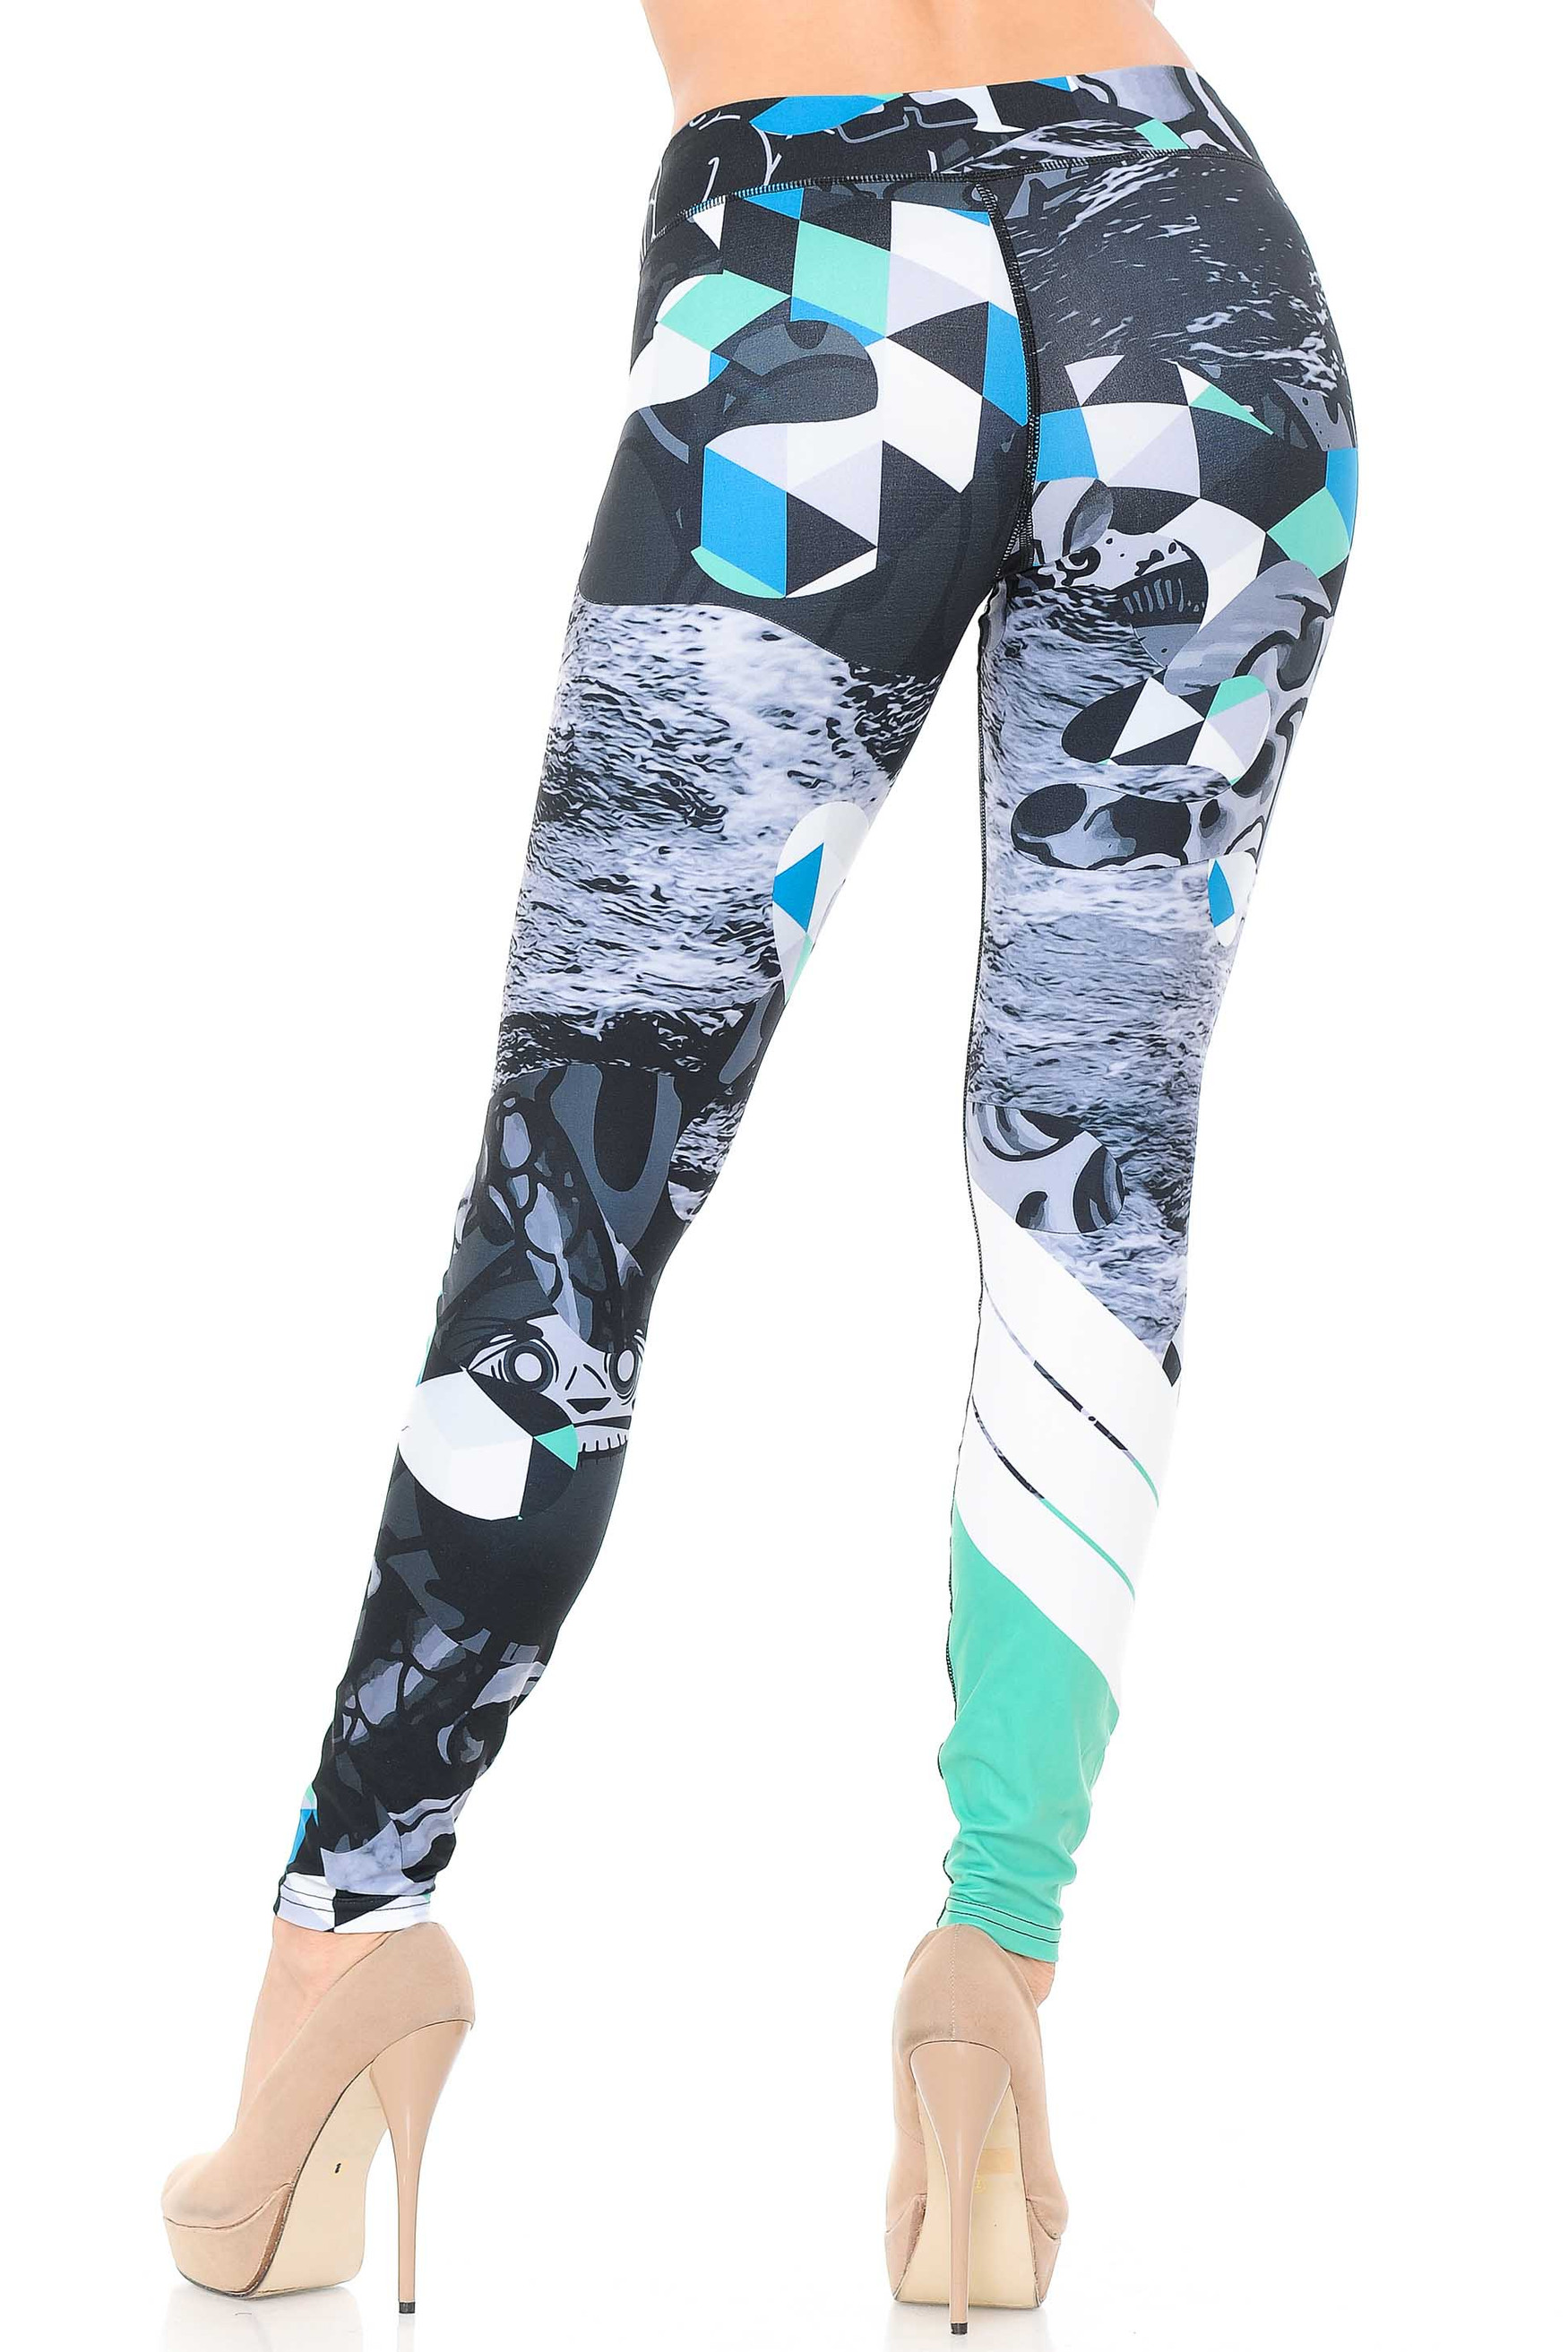 Double Brushed Hypnotic Dreams Leggings - 3 Inch Waistband